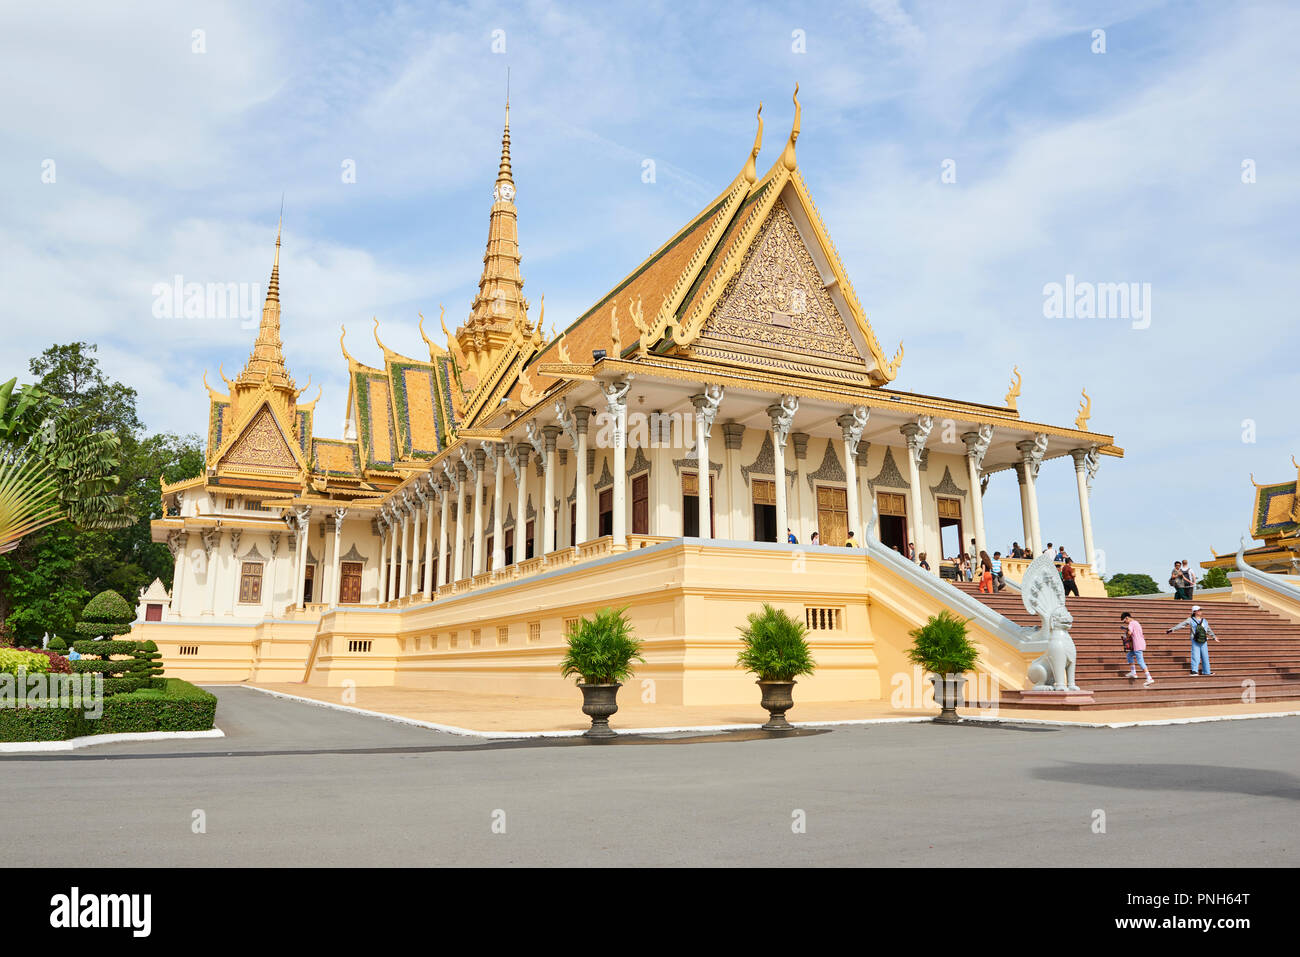 The Throne Hall building inside the Royal Palace complex in Phnom Penh, Cambodia. Stock Photo